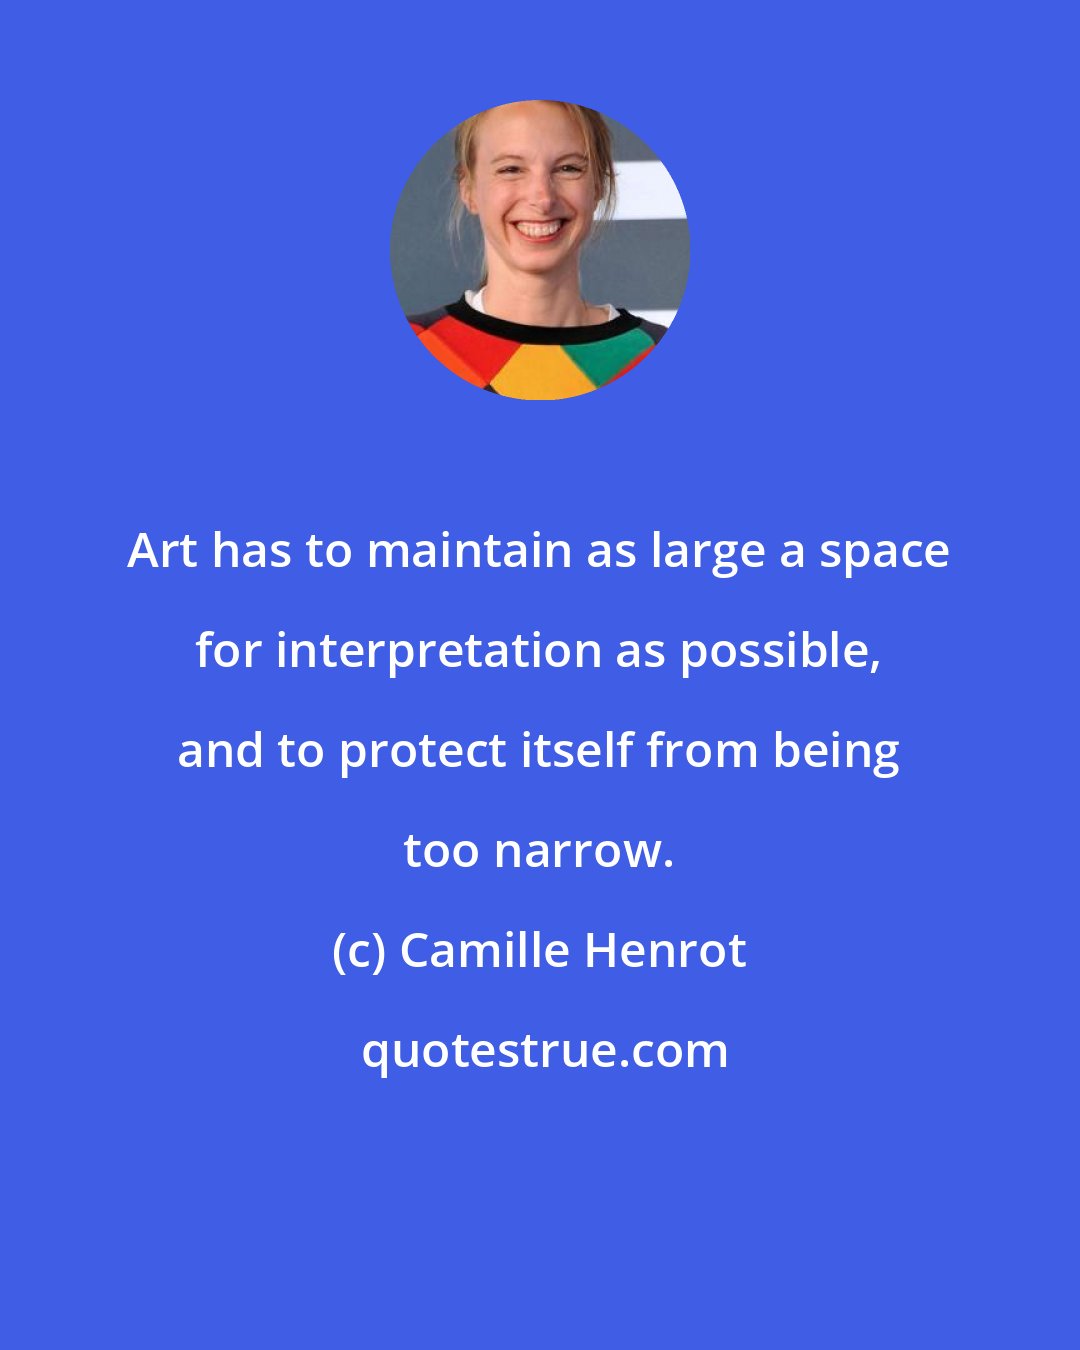 Camille Henrot: Art has to maintain as large a space for interpretation as possible, and to protect itself from being too narrow.